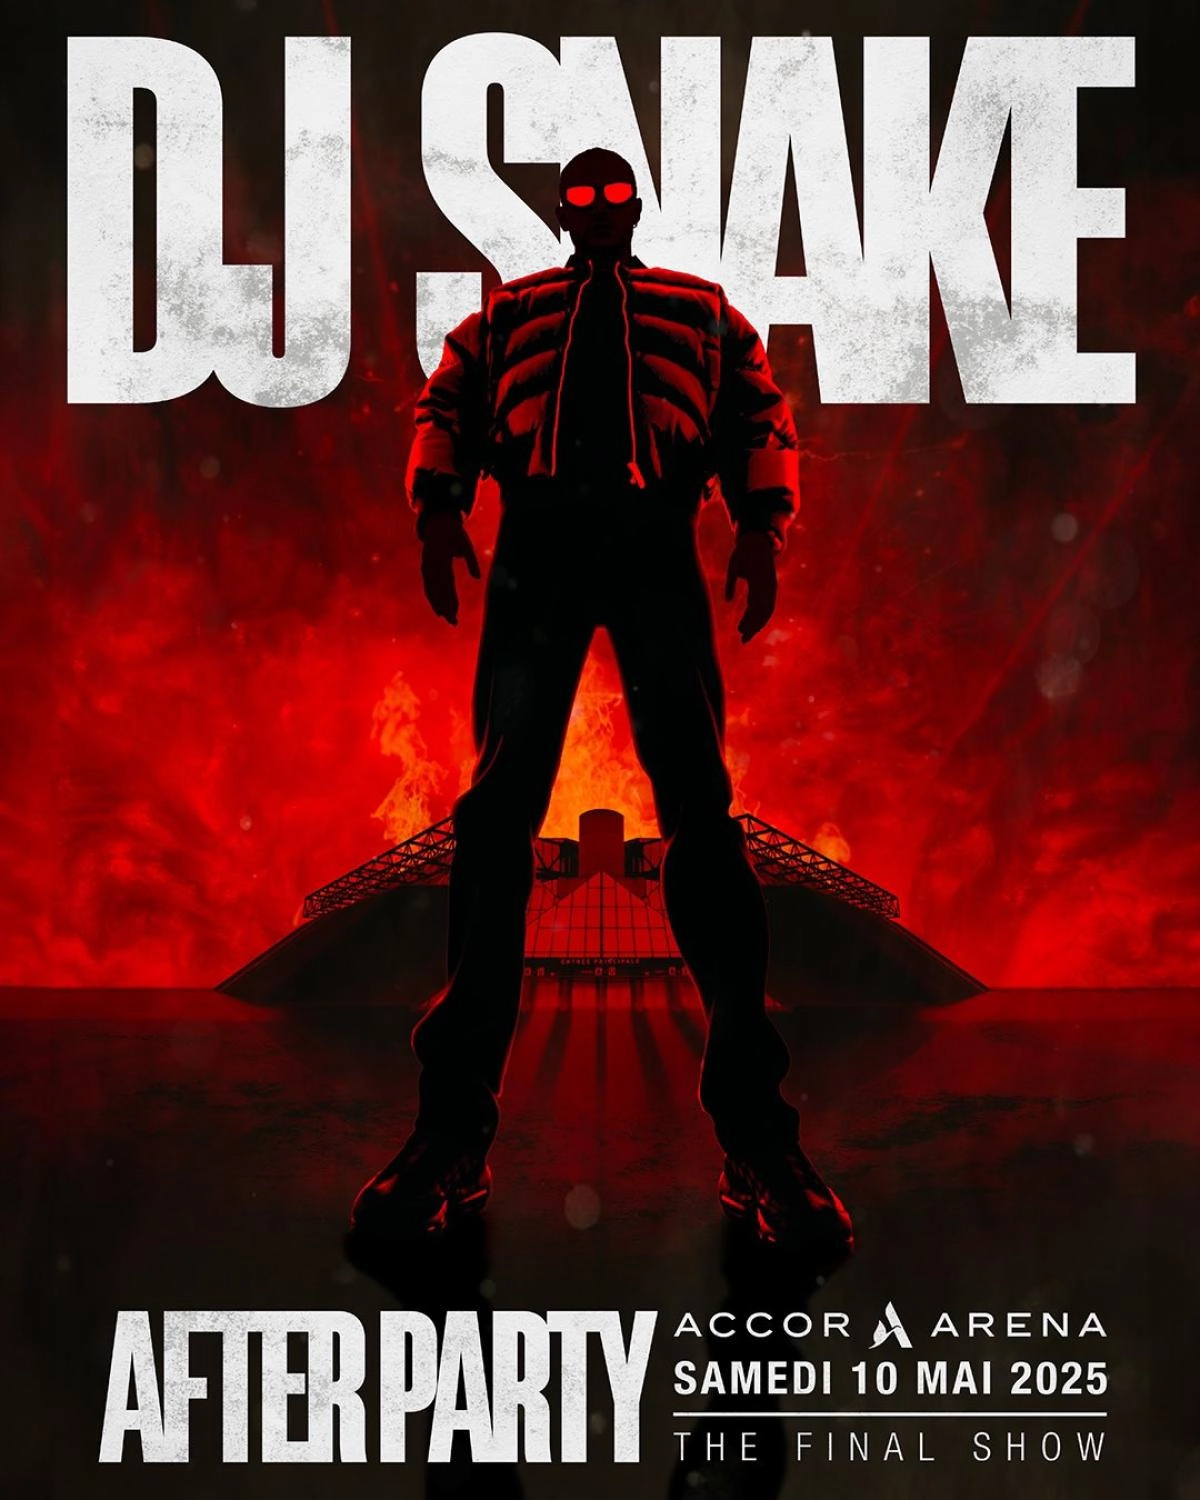 DJ Snake After Party in der Accor Arena Tickets